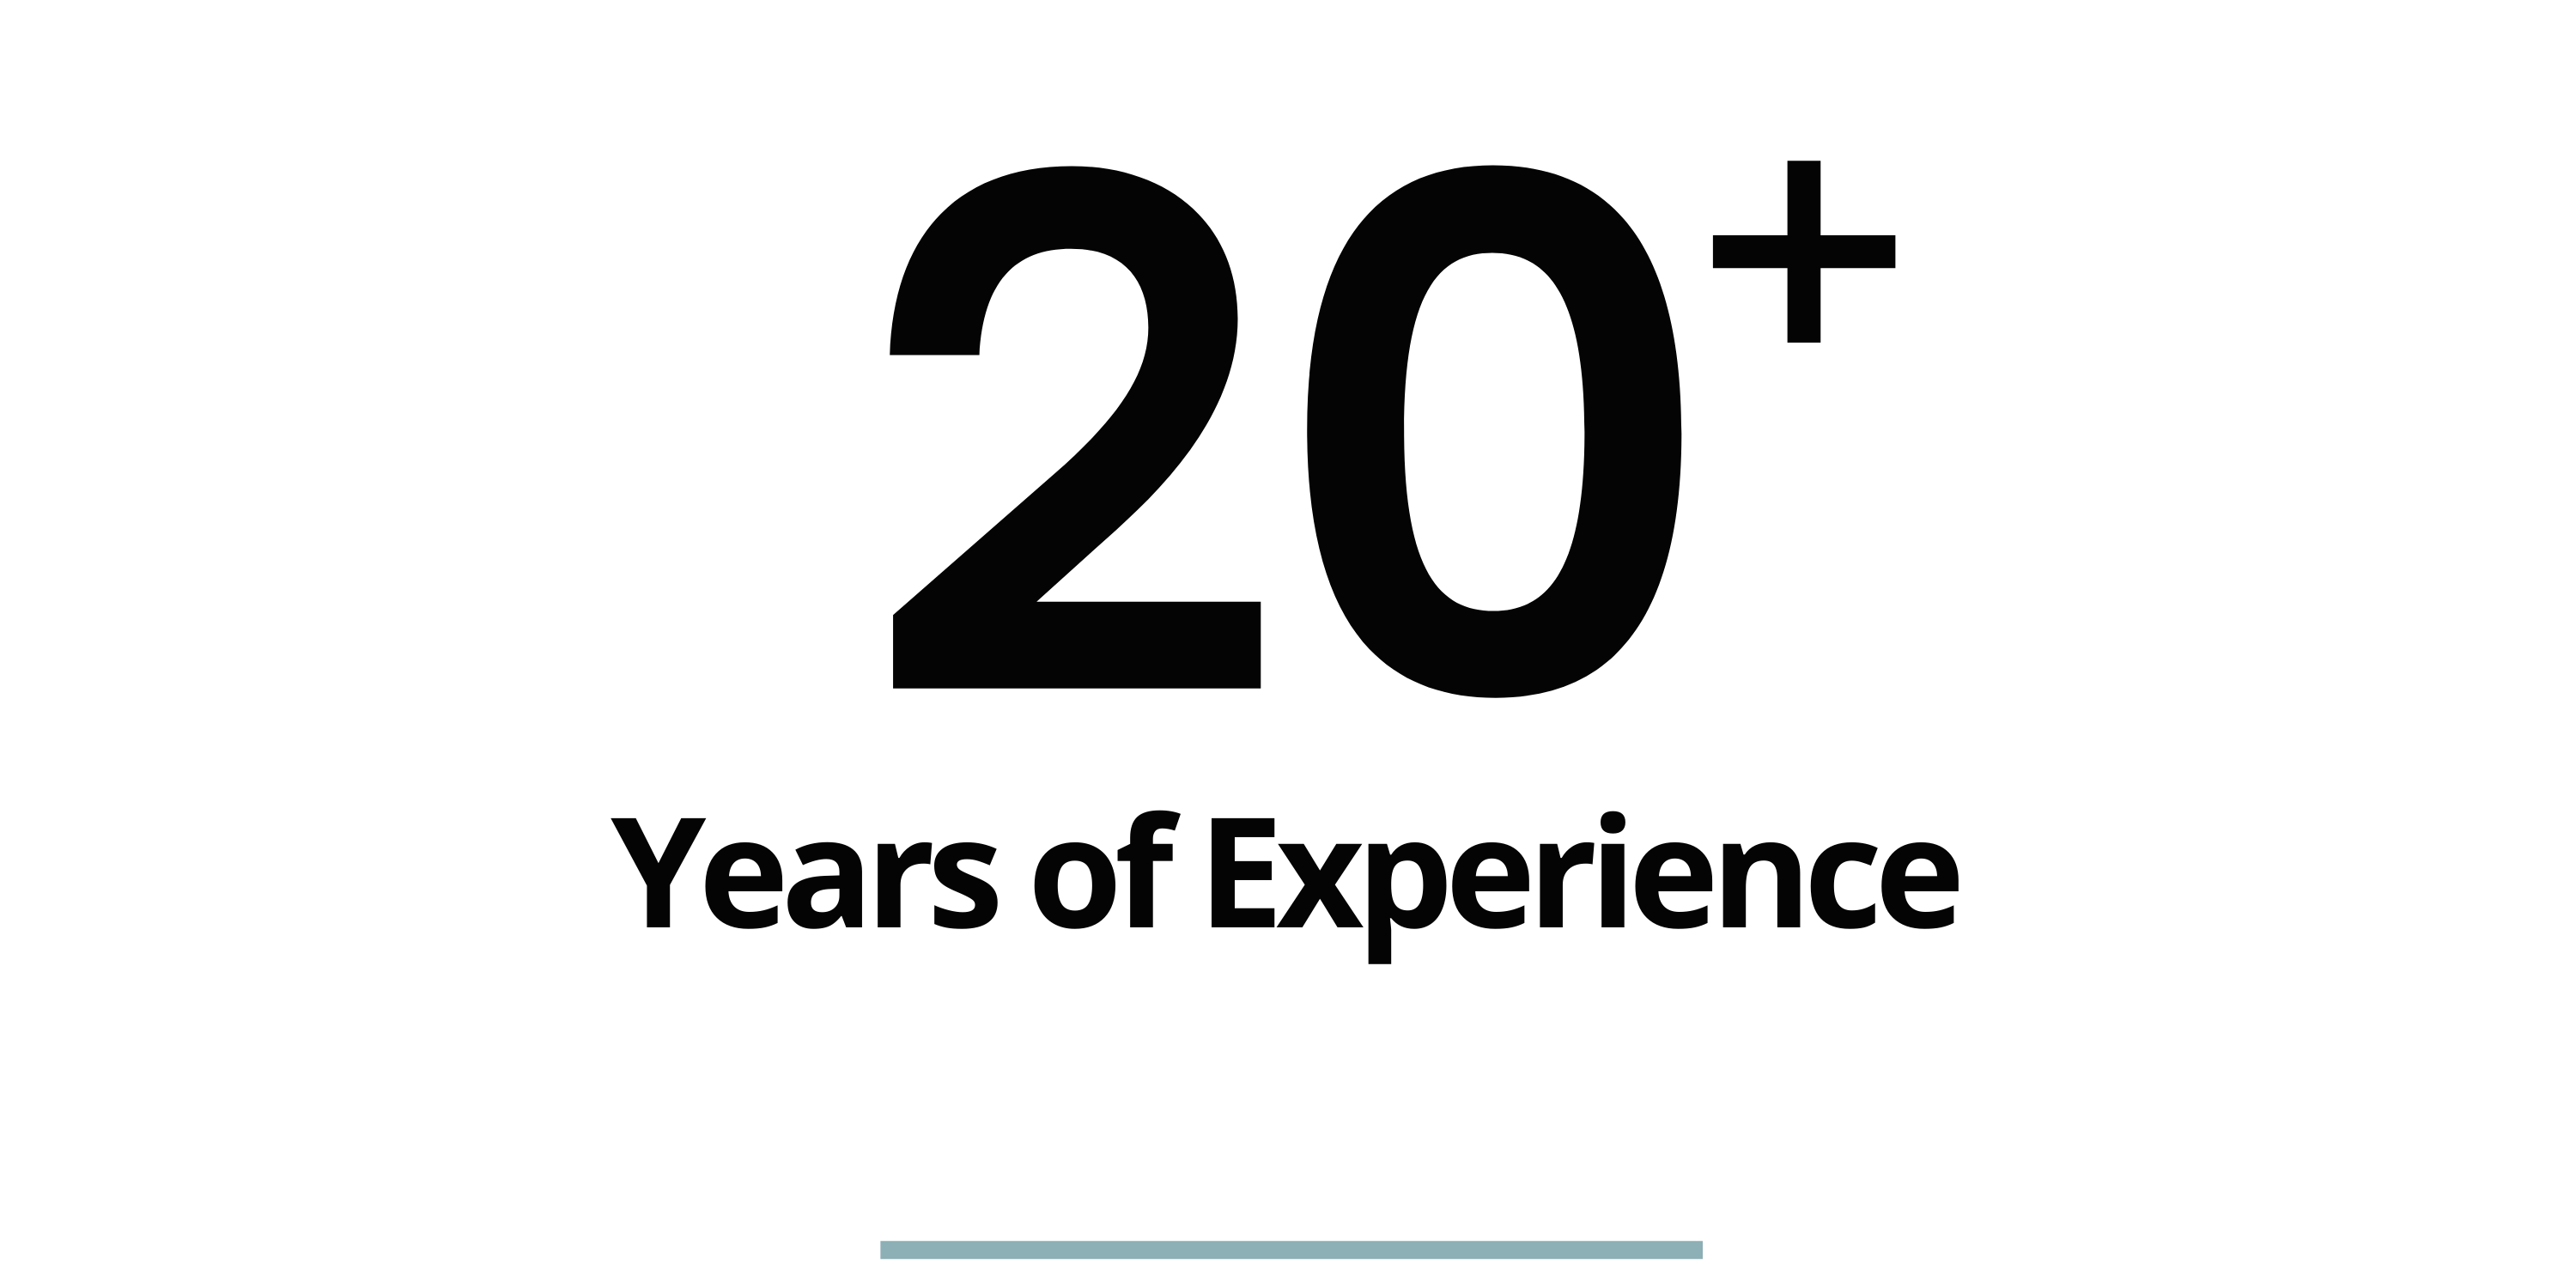 20 Years of Experience